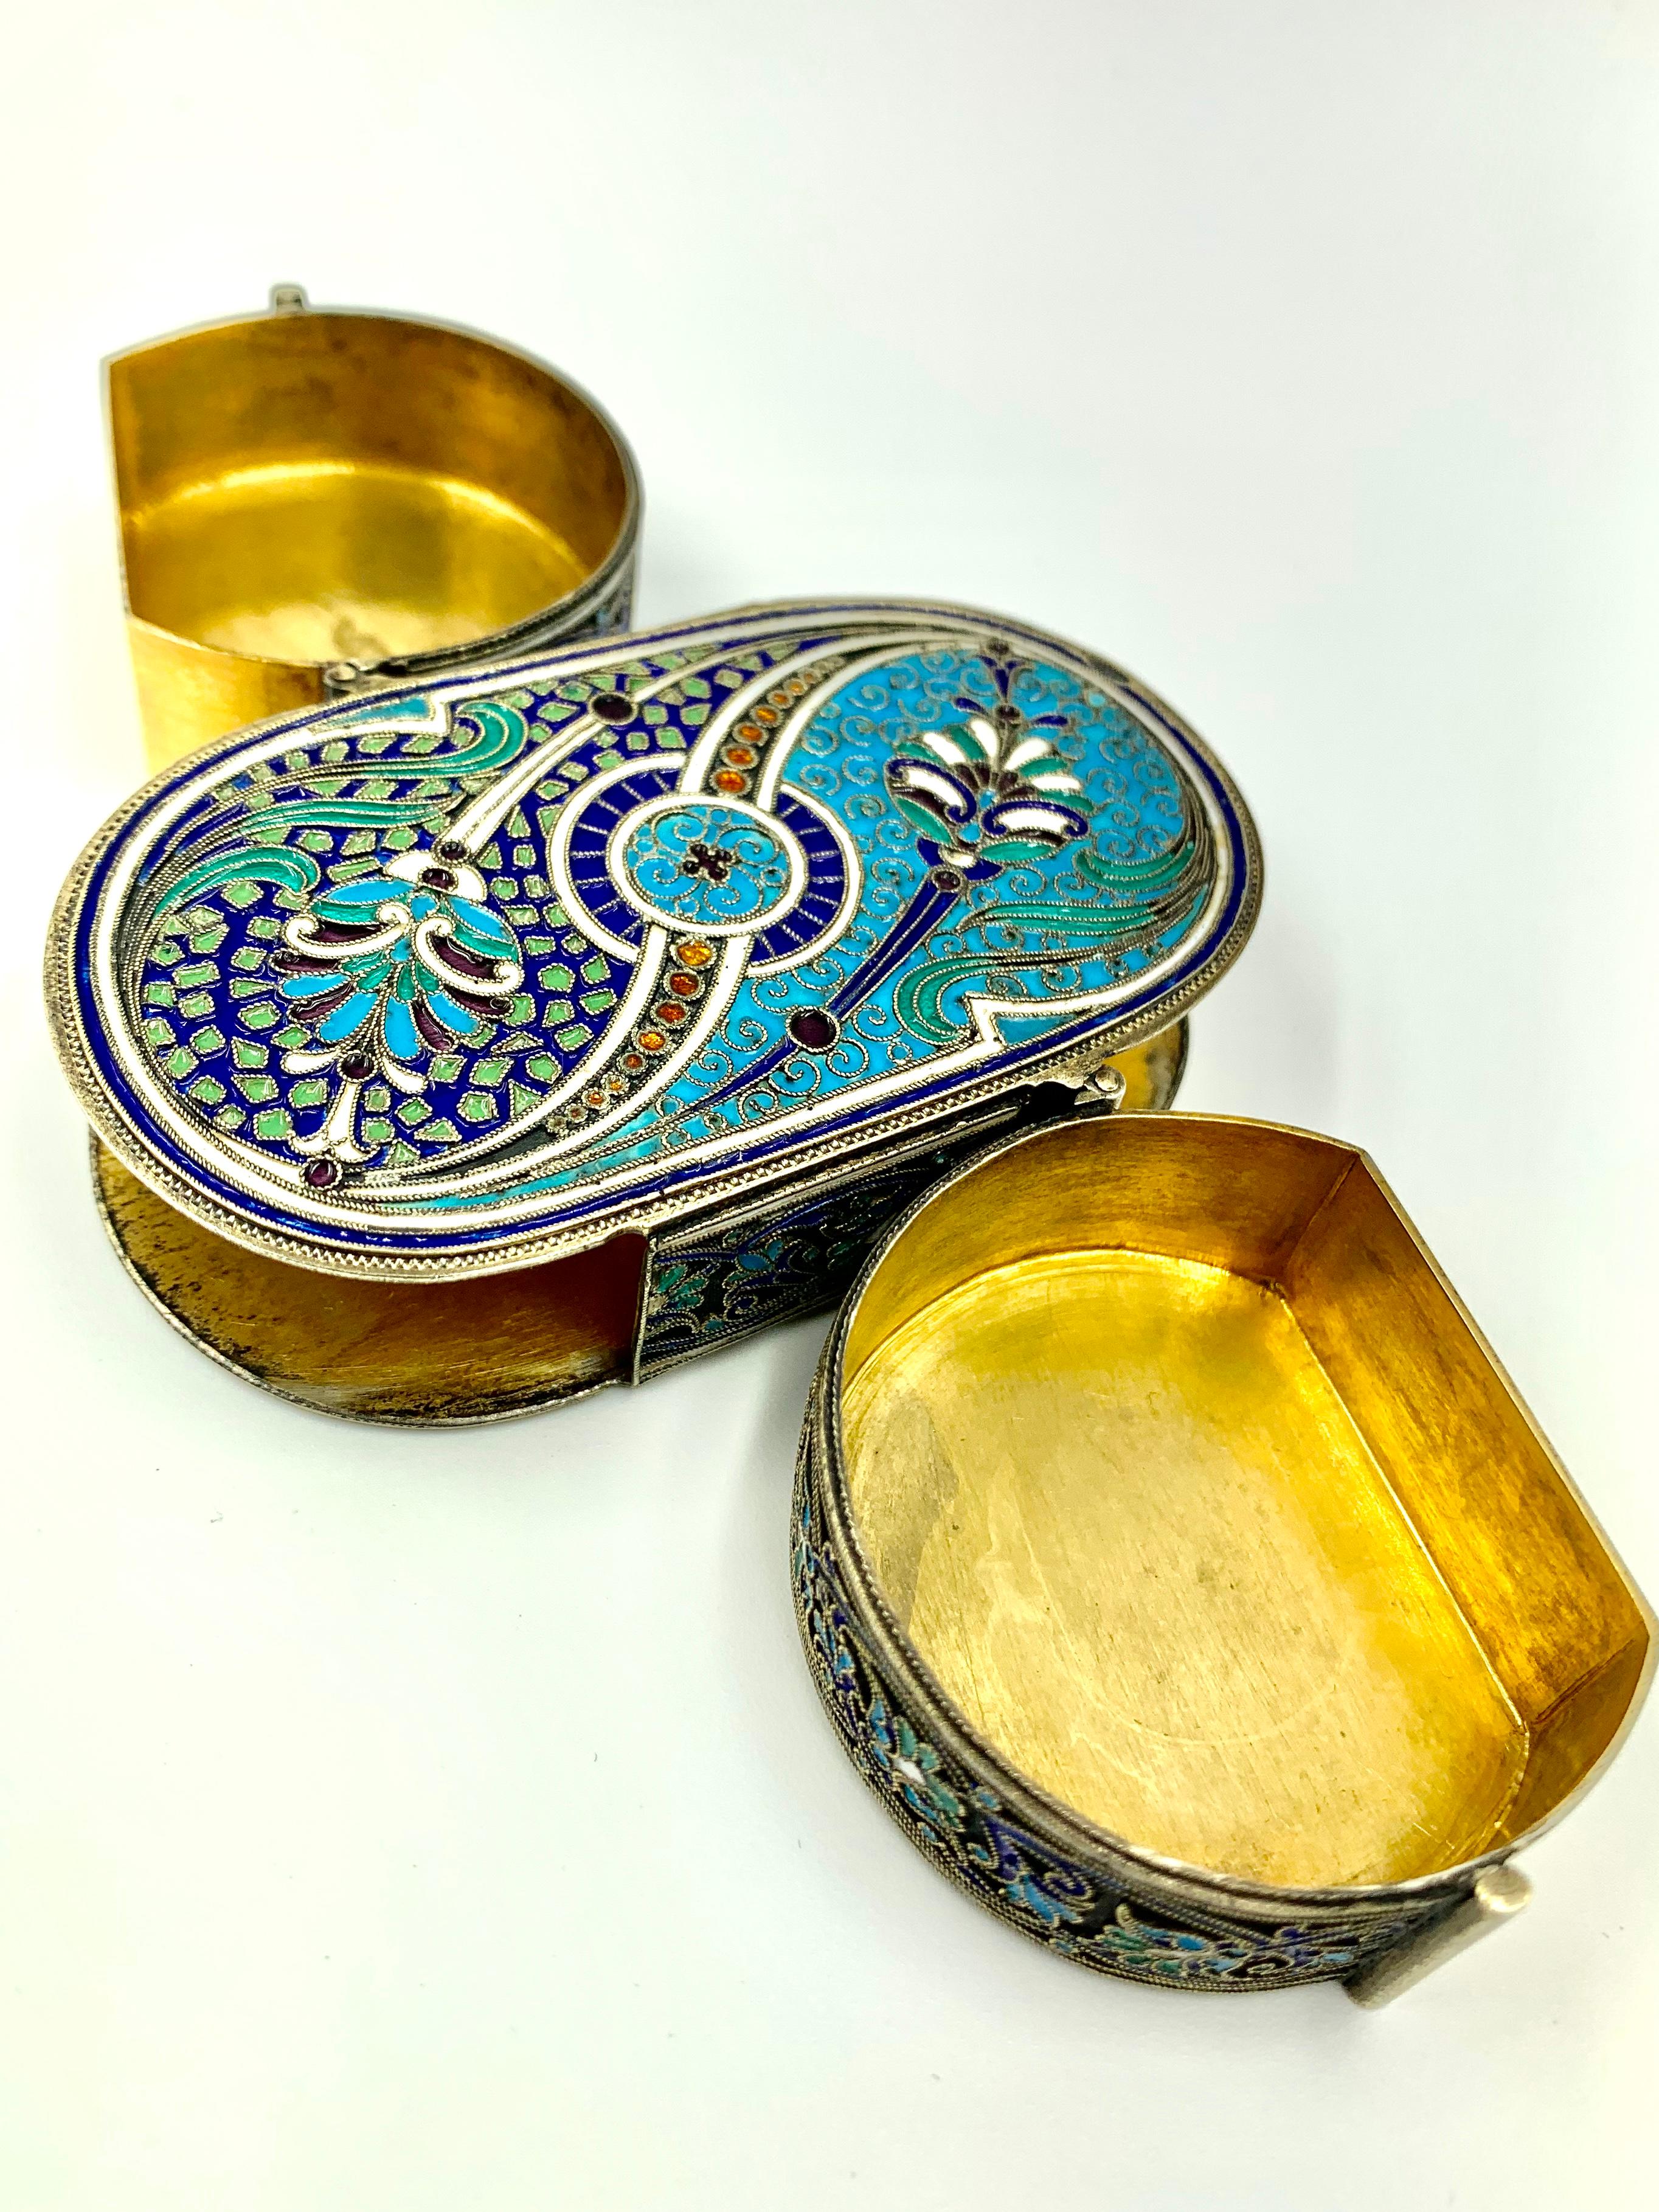 Fine and rare antique Russian silver and enamel double sided yin/yang snuff box by Antip Kuzmichev. This exquisite snuff box opens on the sides rather than at the top to reveal two hidden gilded silver compartments, both hinged and fully hallmarked.